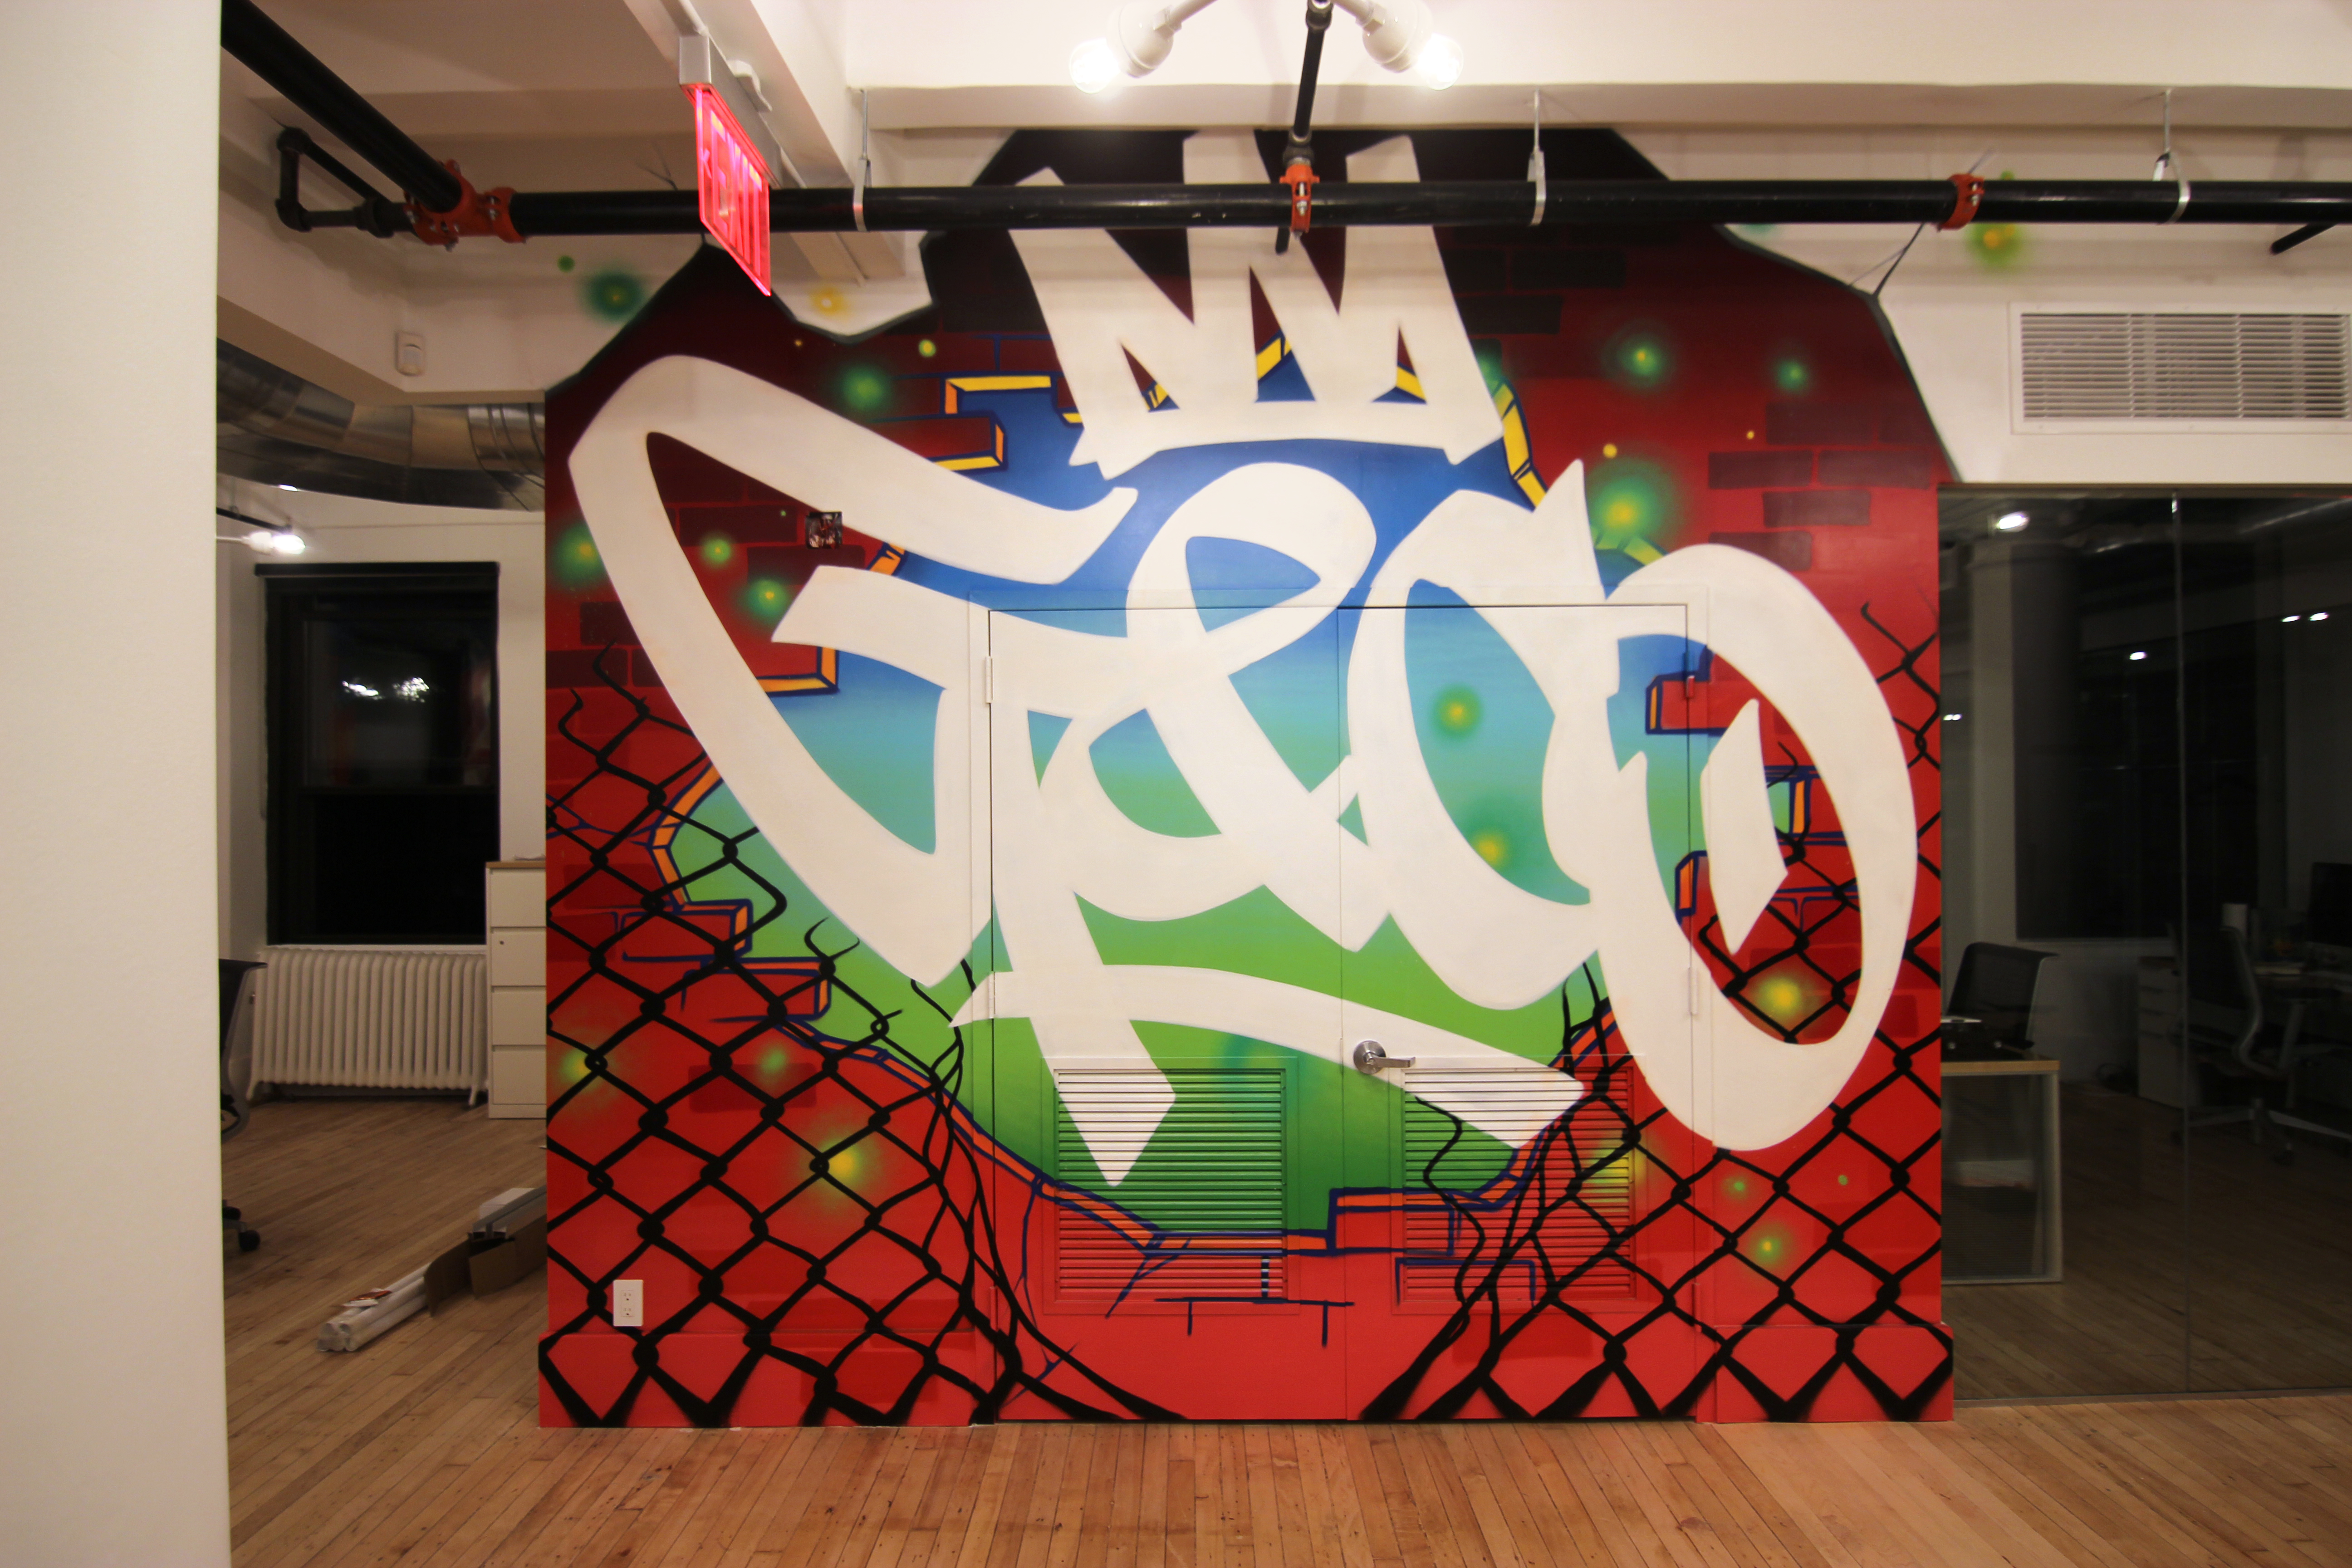 Goldsmith and Co, Masterpiece NYC, masterpiece murals, hand painted mural, office mural, custom mural, mural, graffiti mural, graffiti artist for hire, graffiti mural, graffiti artist